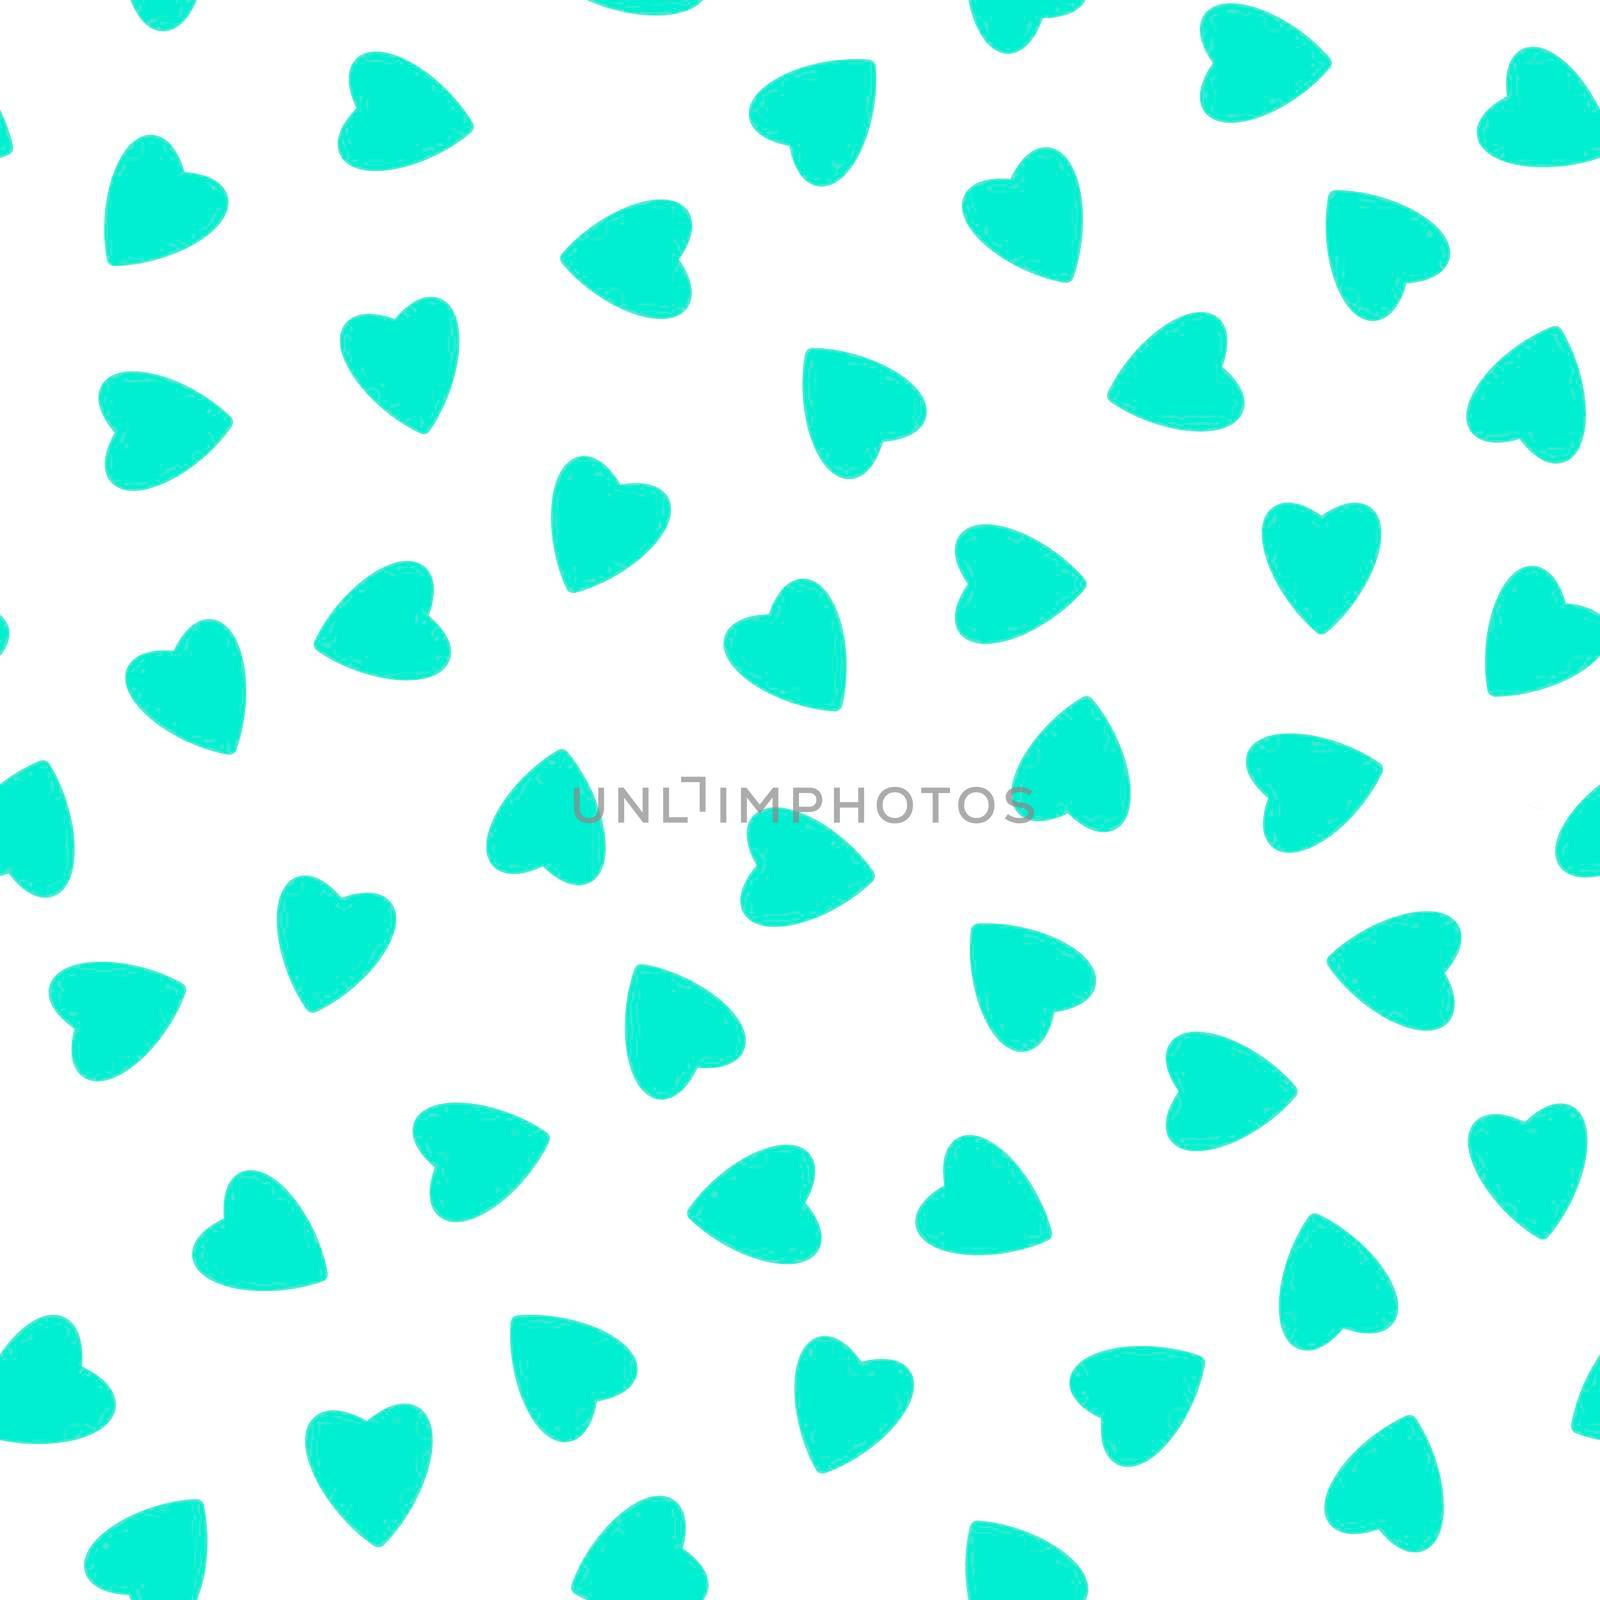 Simple hearts seamless pattern,endless chaotic texture made of tiny heart silhouettes.Valentines,mothers day background.Great for Easter,wedding,scrapbook,gift wrapping paper,textiles.Azure on white.